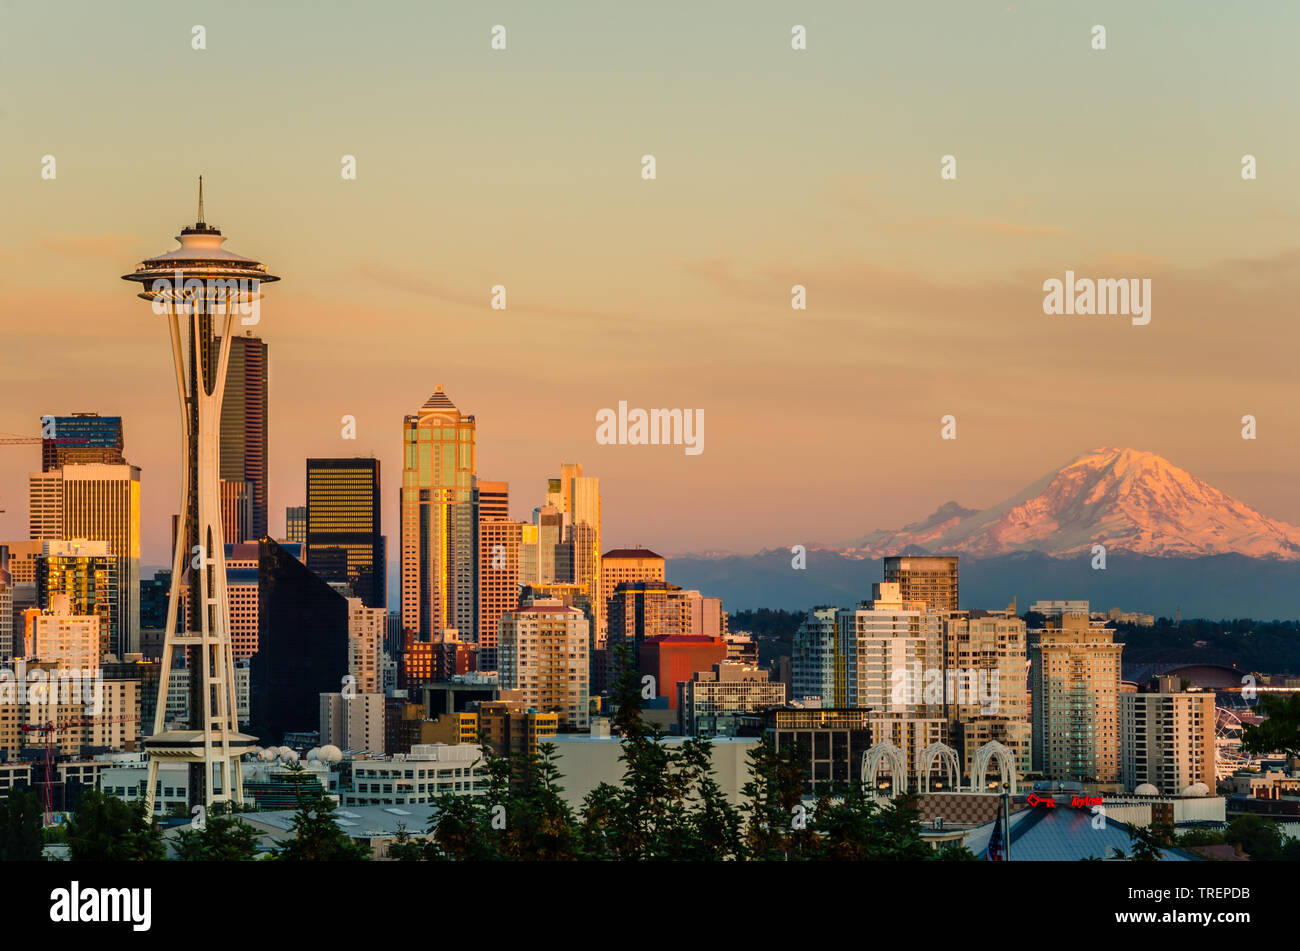 Seattle skyline with a snow-capped Mount Rainier in background at Sunset Stock Photo